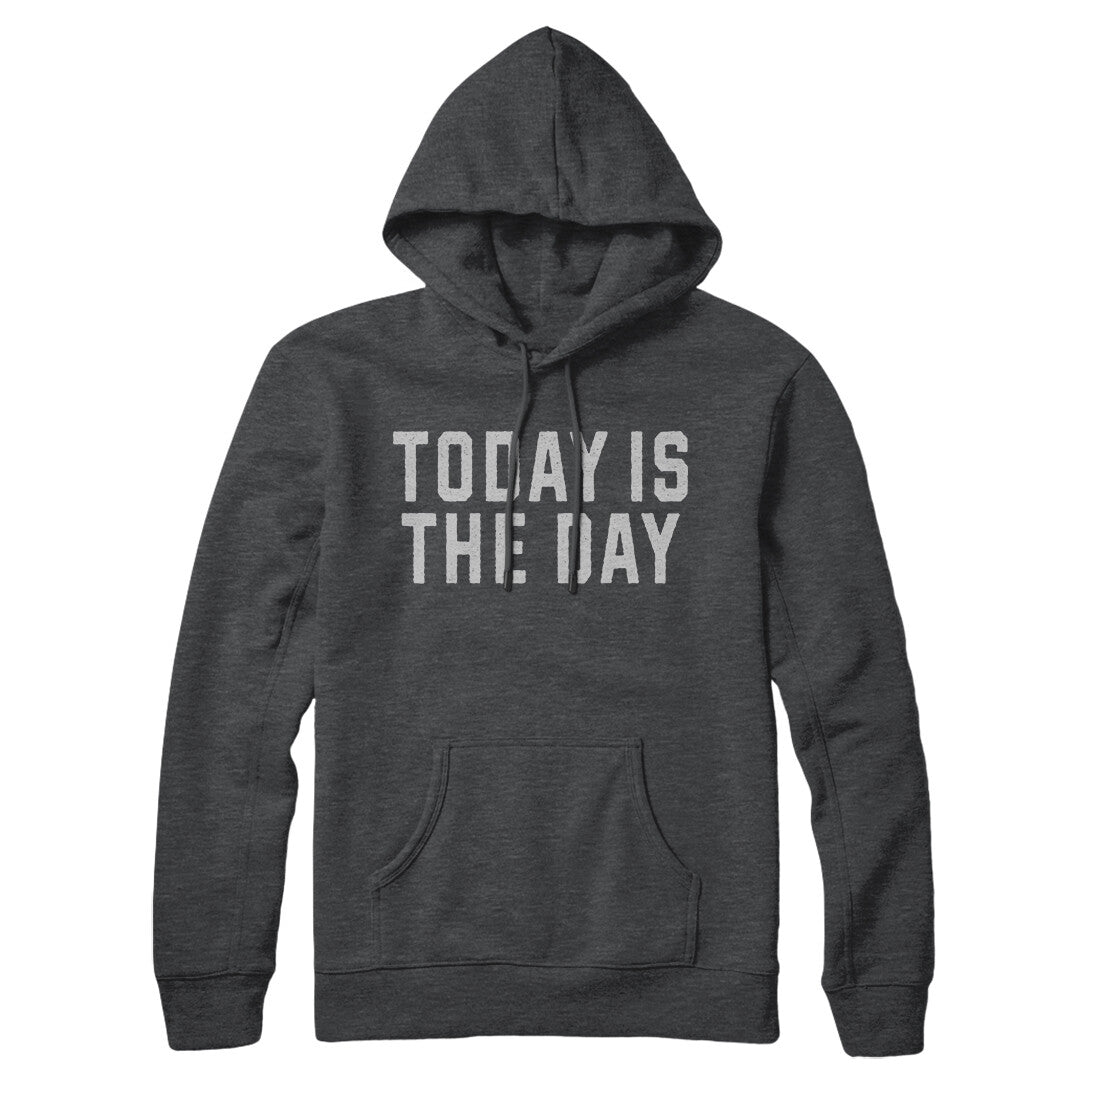 Today is the Day in Charcoal Heather Color